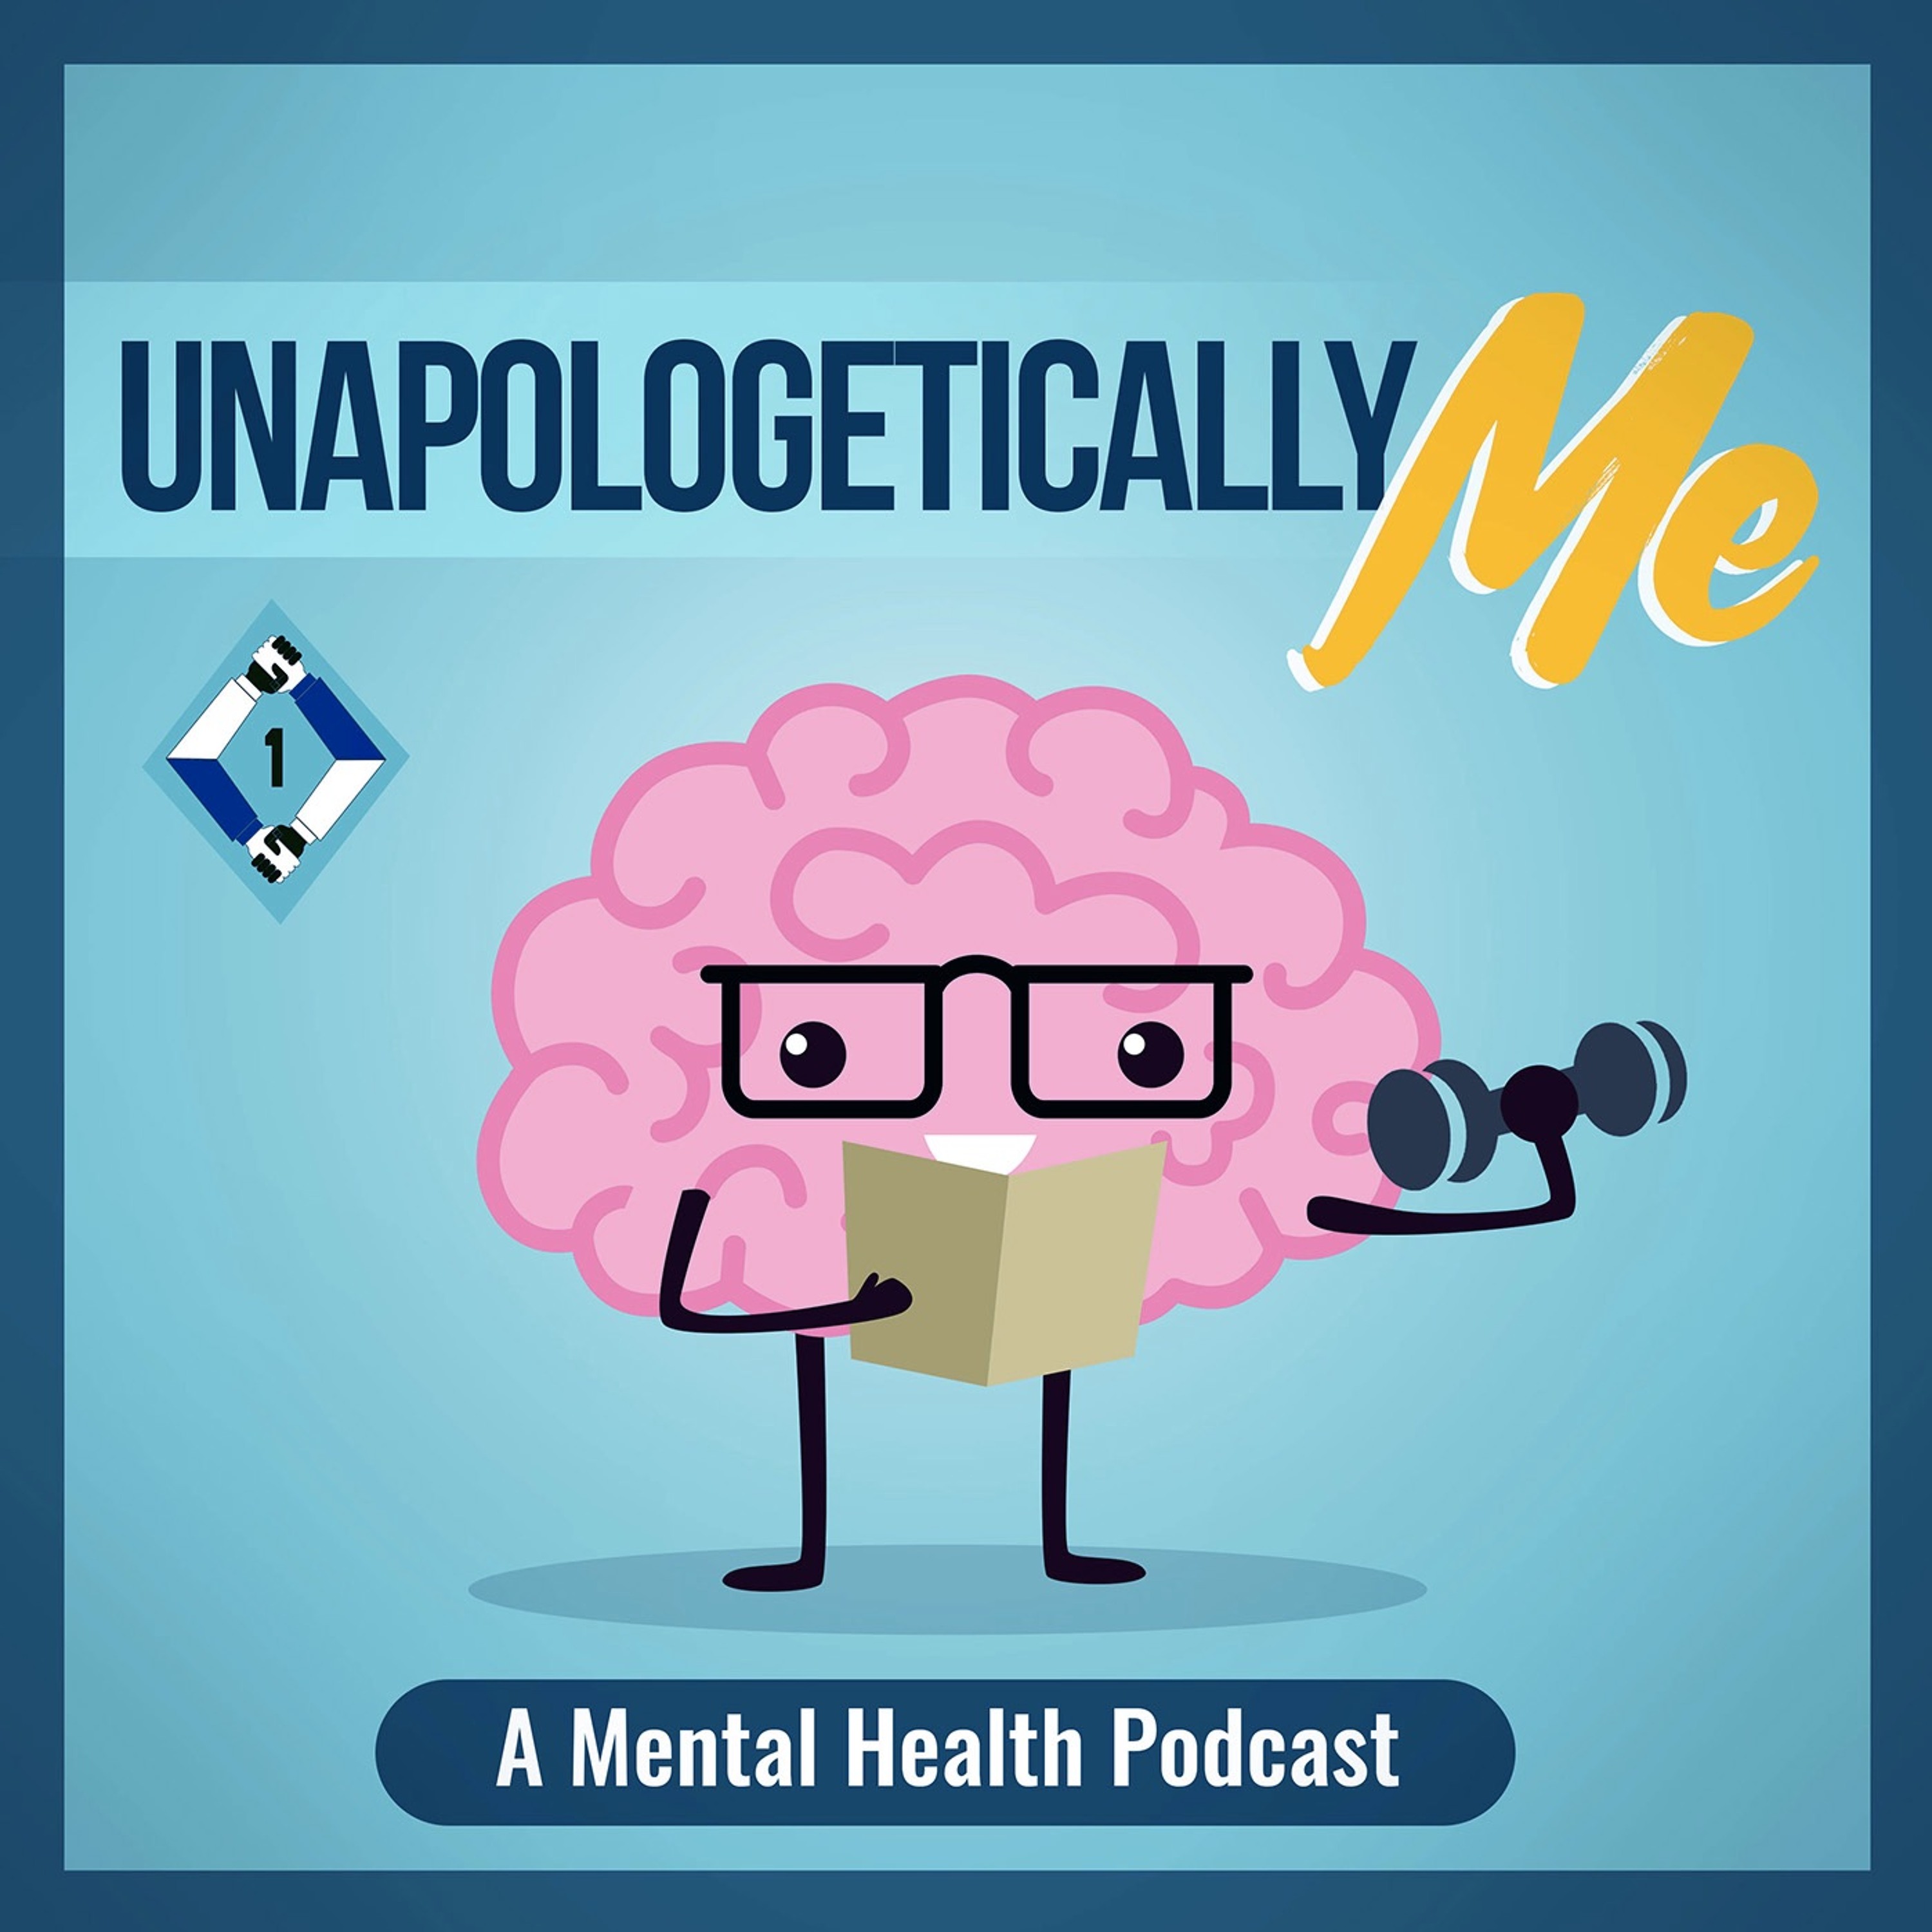 Unapologetically Me: A Mental Health Podcast - From The Army To Addiction To Recovery